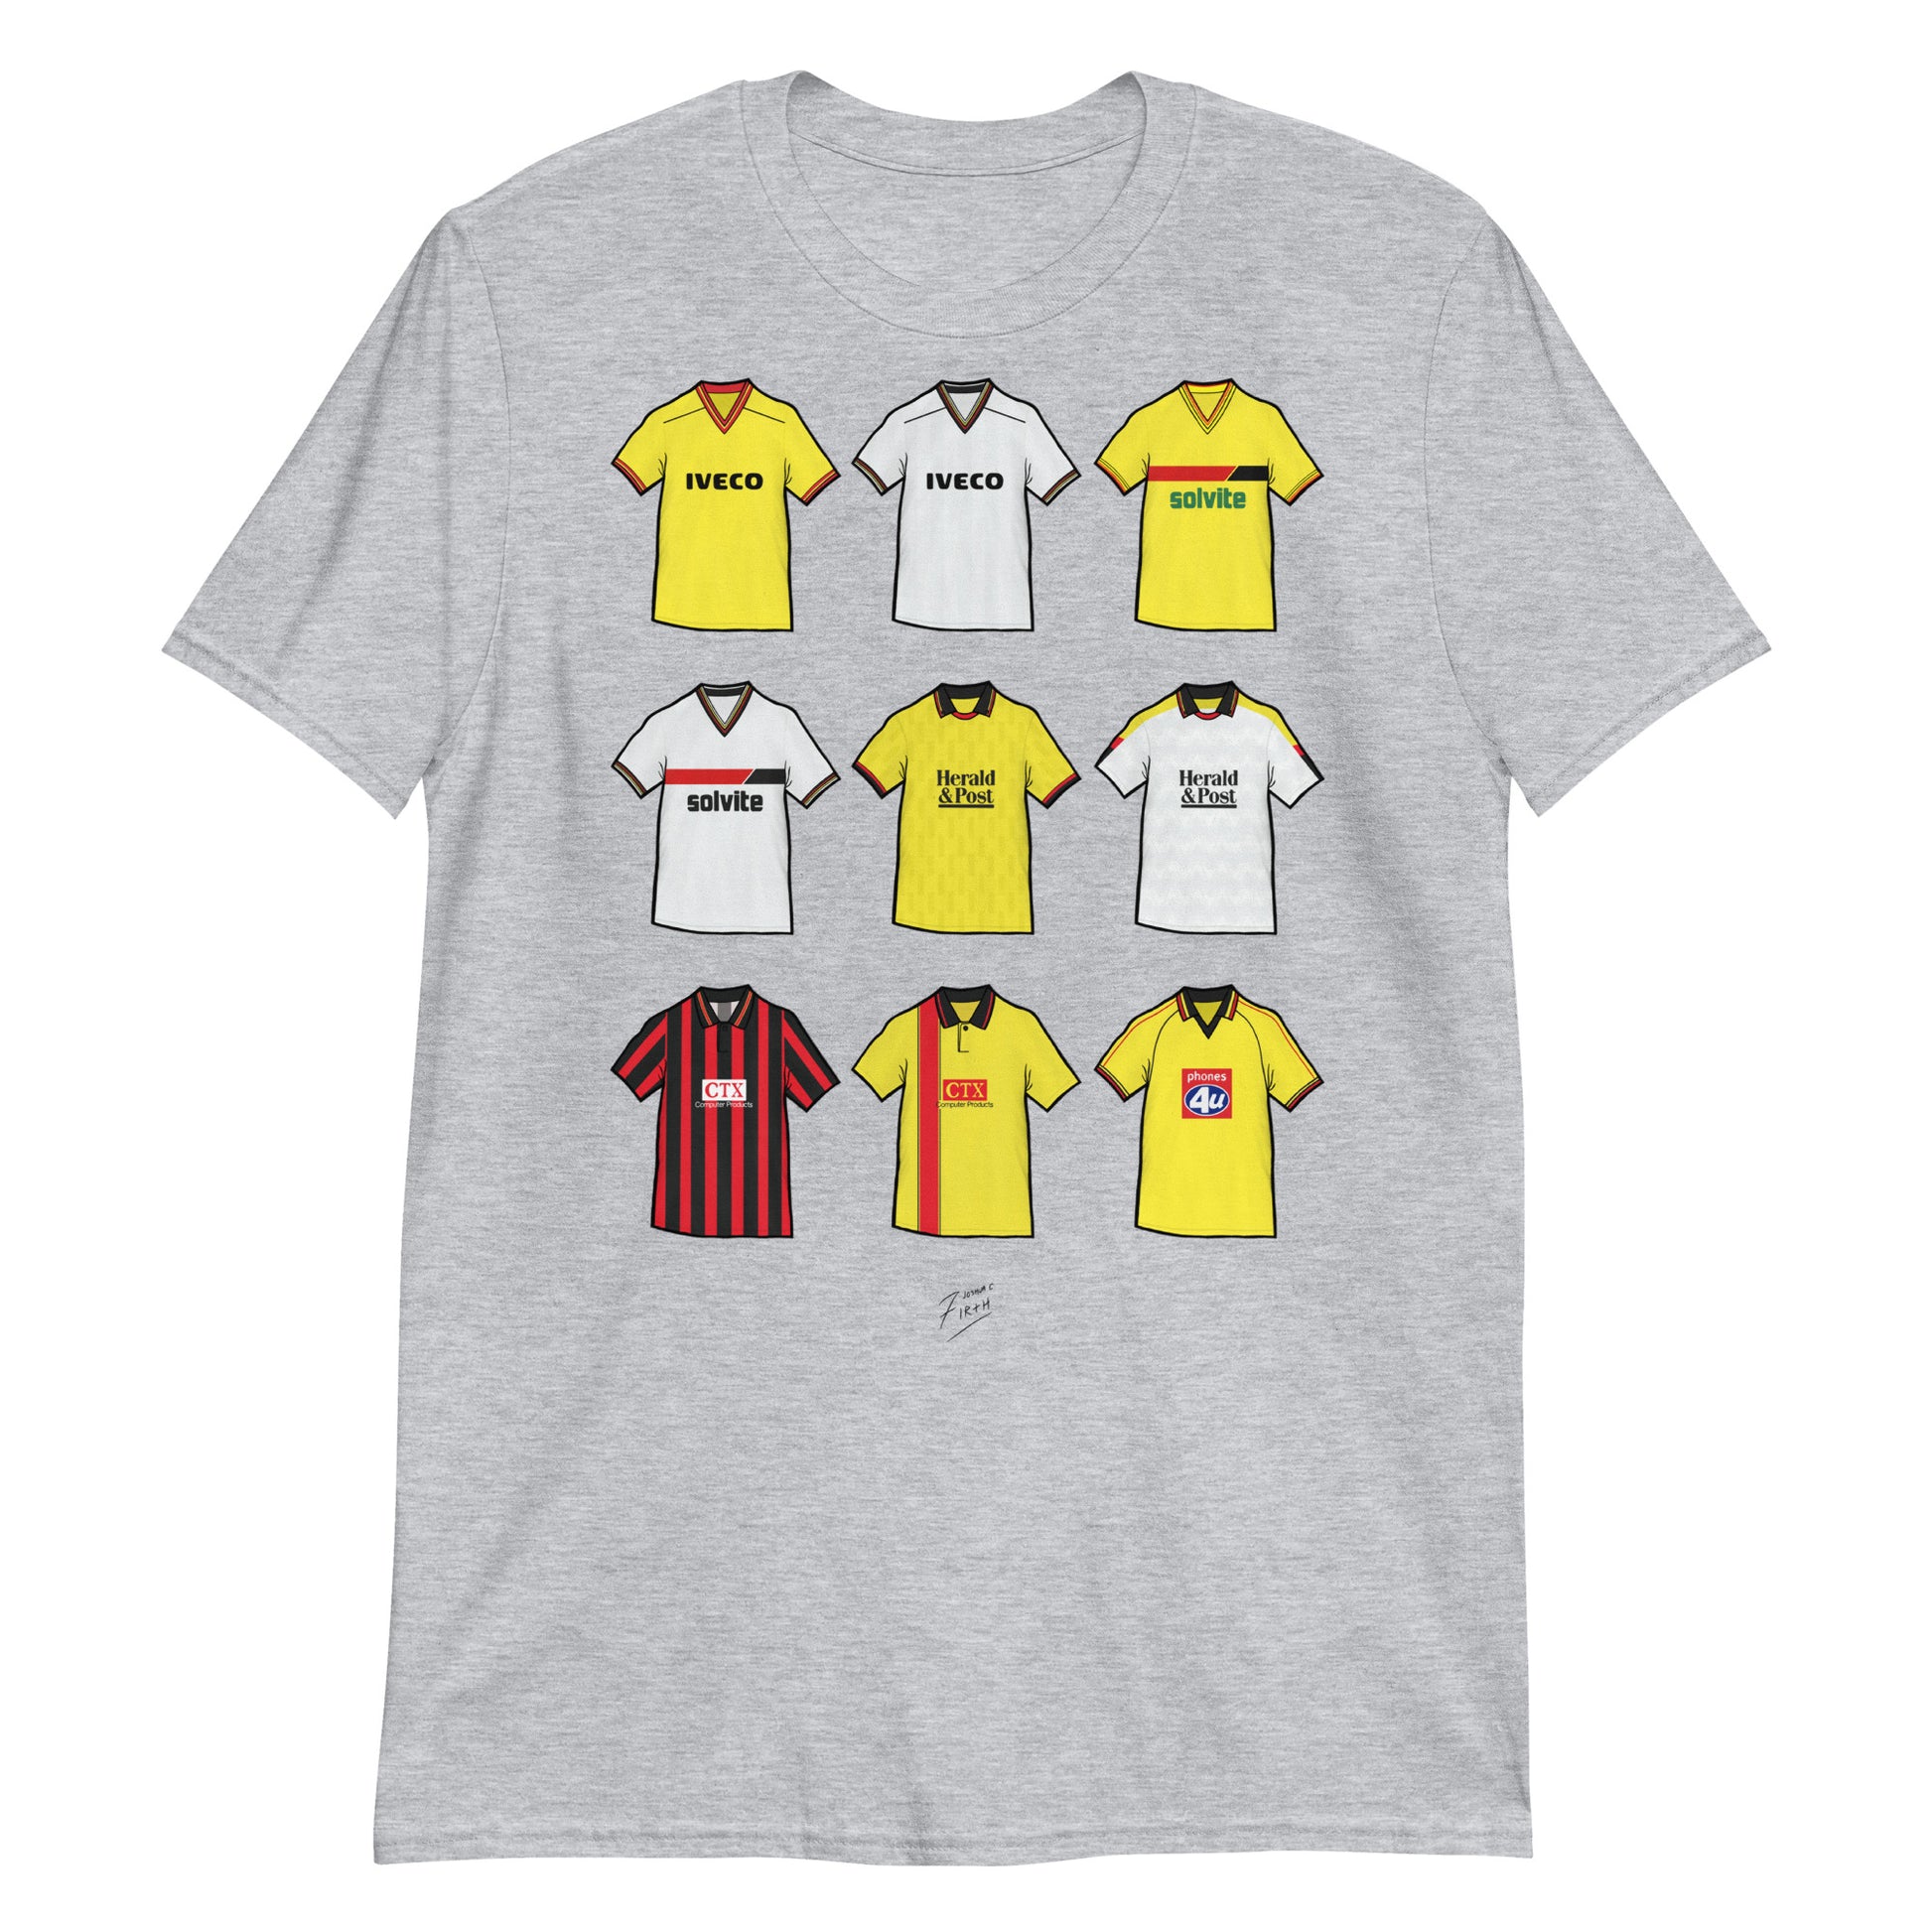 Light Grey Watford themed football t-shirts inspired by their retro jerseys of the past!